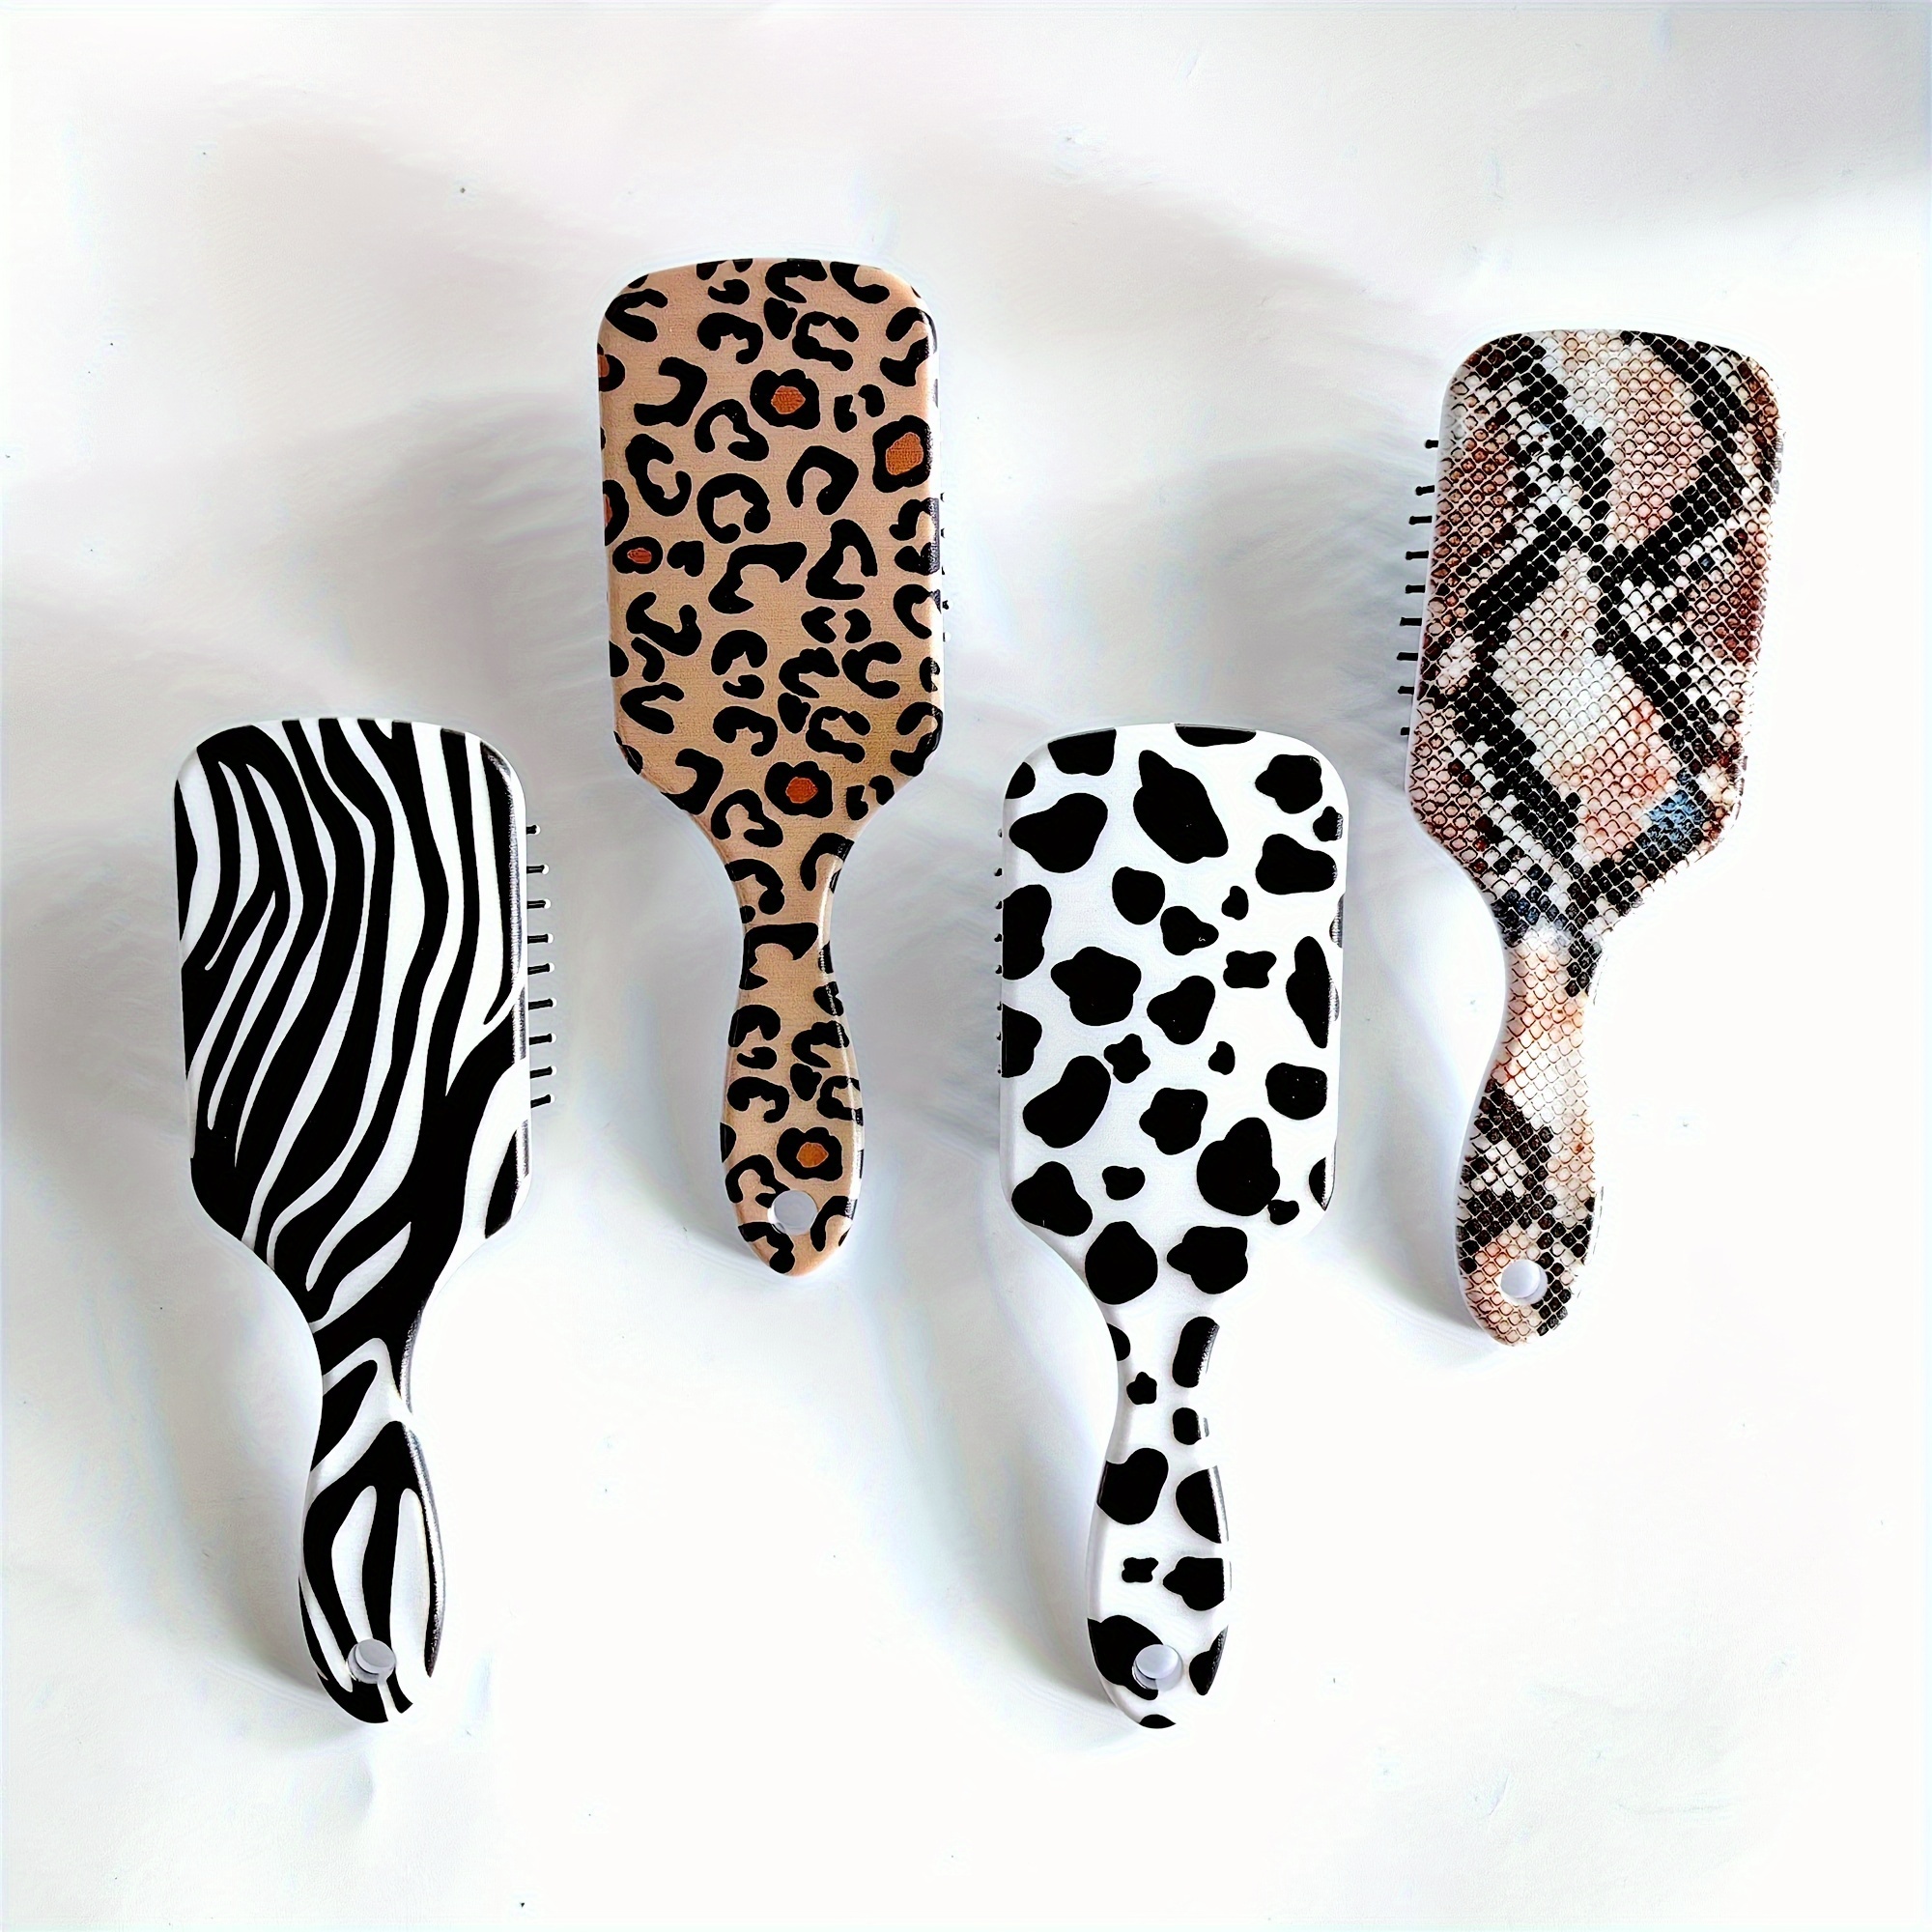 

Animal Print Hair Brushes - Cow, Zebra, Leopard, Snake Designs - Stylish Hair Tools For Normal Hair Types